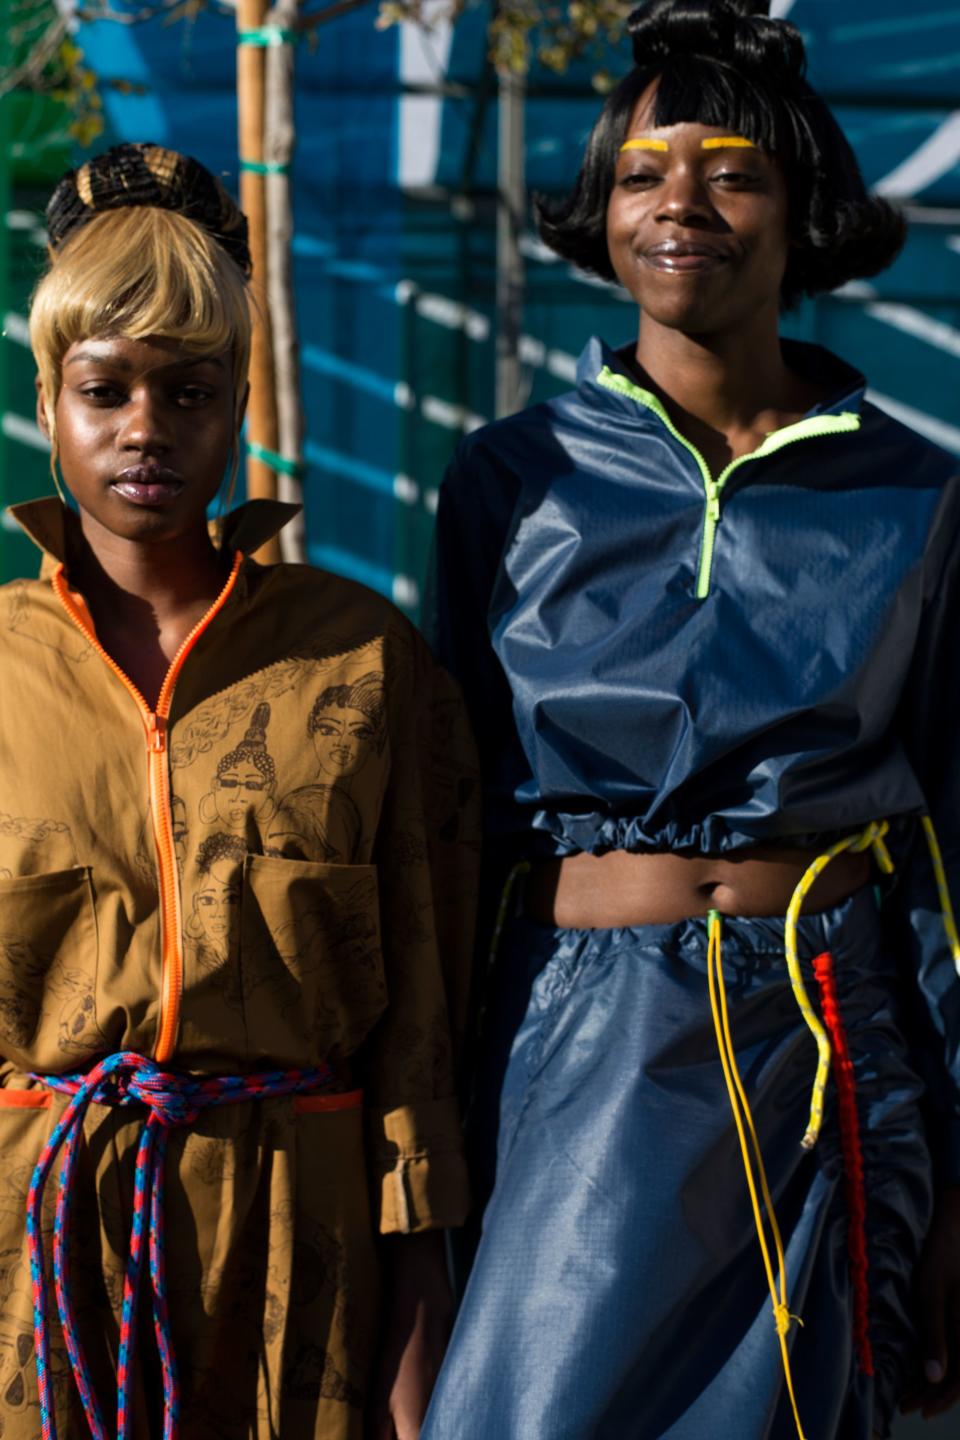 Inside the Bephie x No Sesso presentation, a collaboration between two female powerhouse designers.